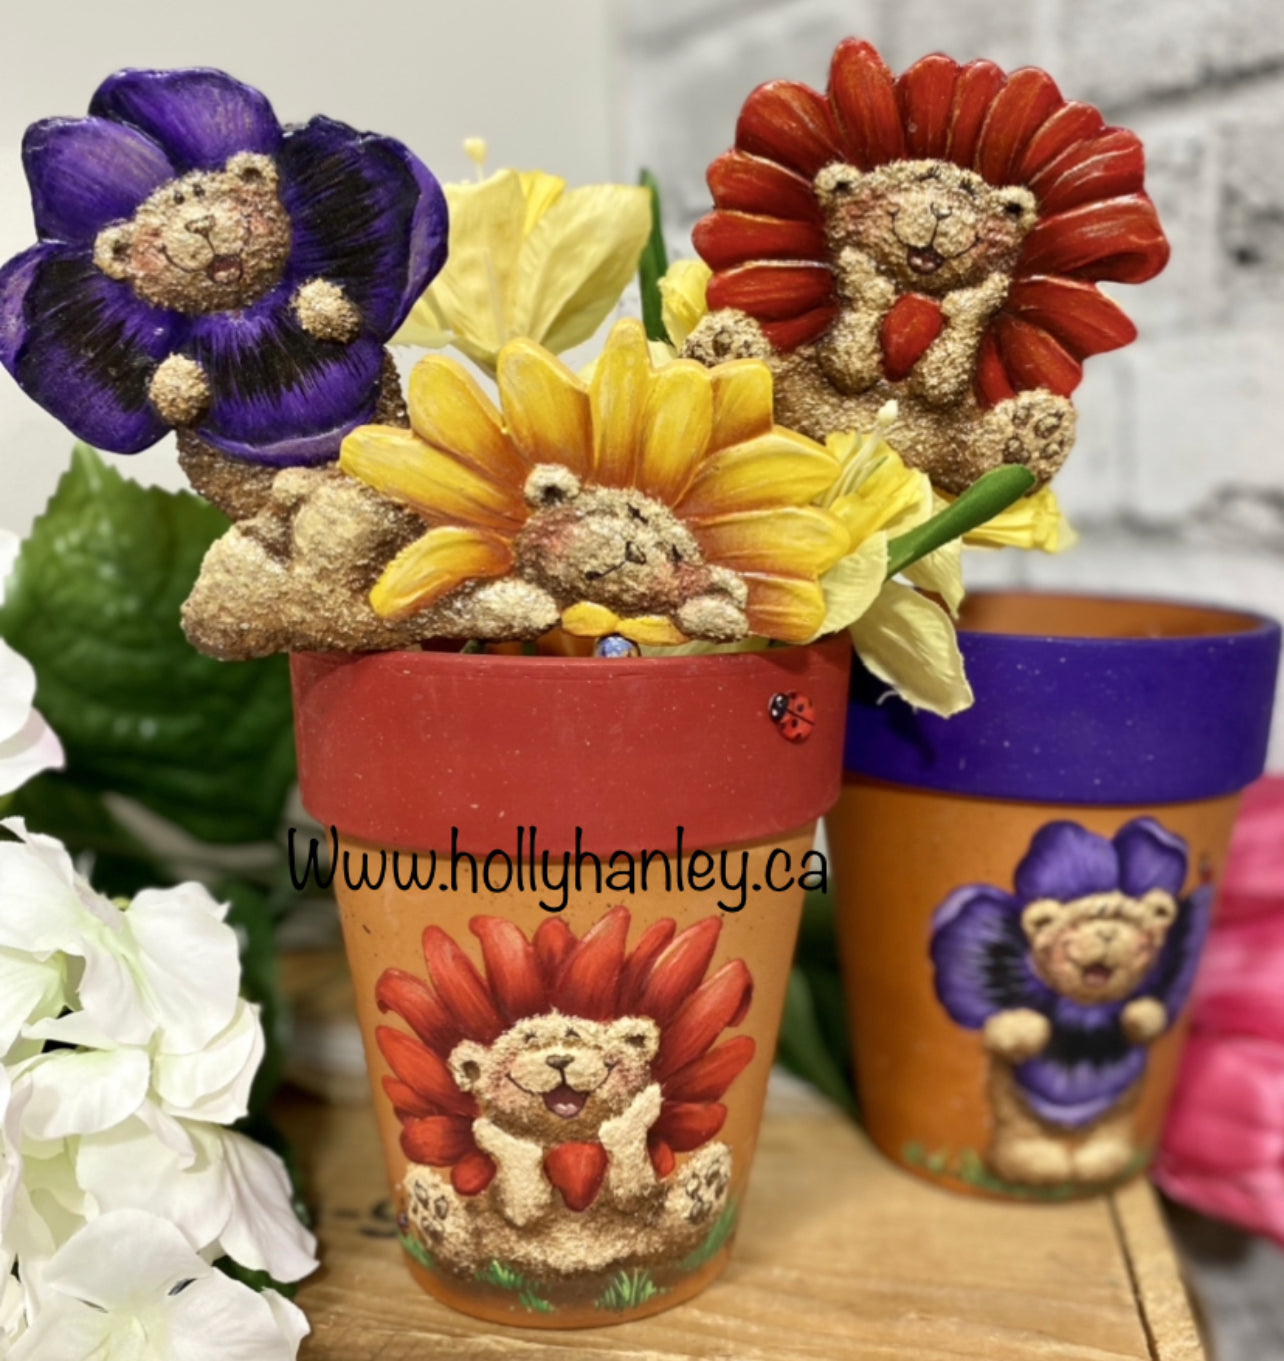 CARTAMODELLO -epattern- Flower pot bears by HOLLY HANLEY (TRADOTTO IN ITALIANO) Out of the Wood